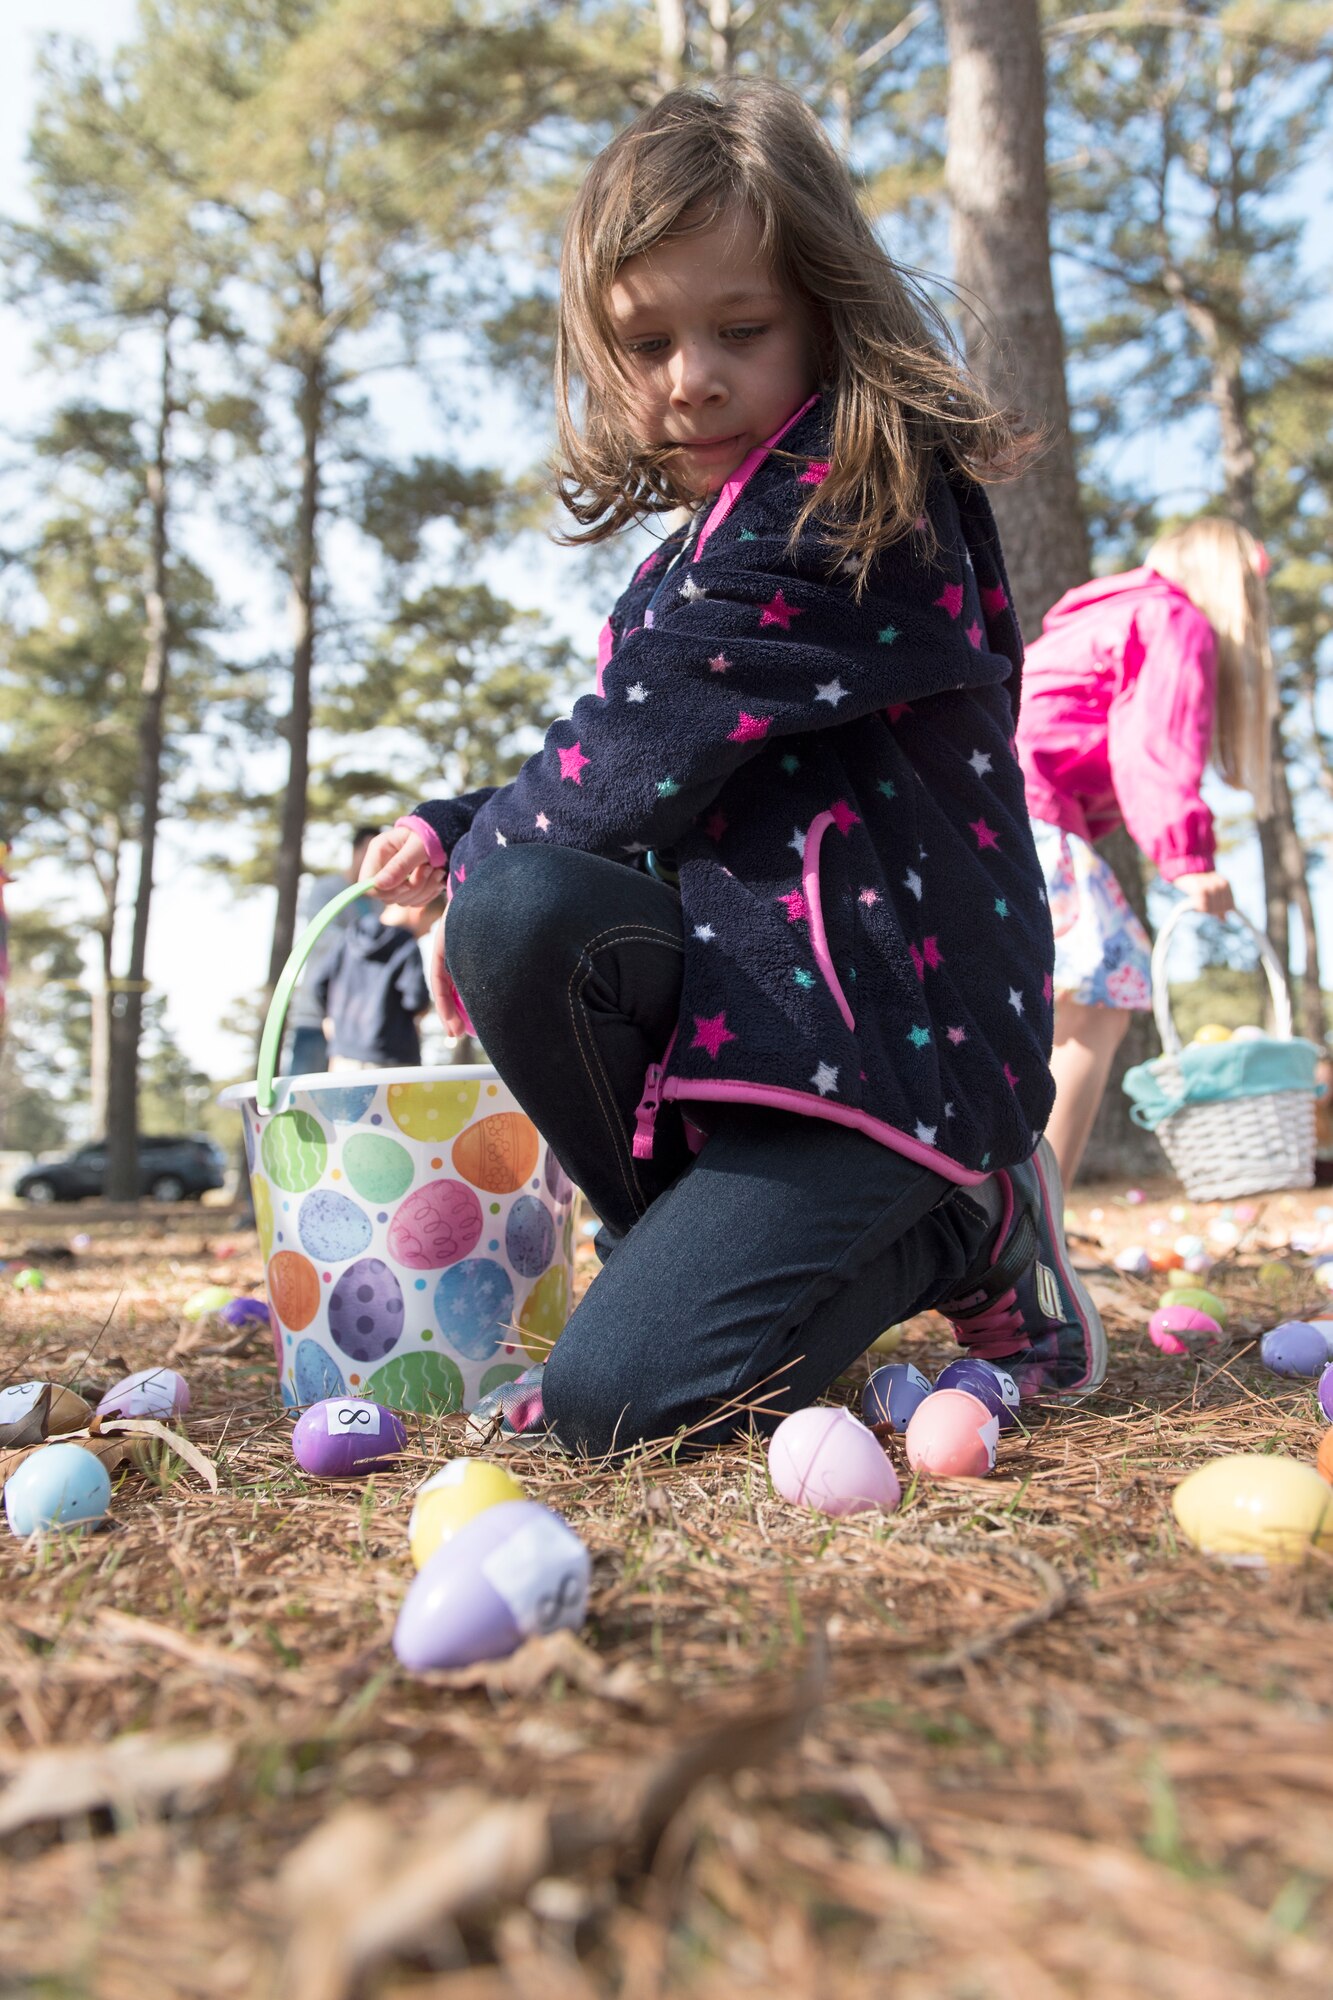 Youth Center prepares children for 'Easter Games'